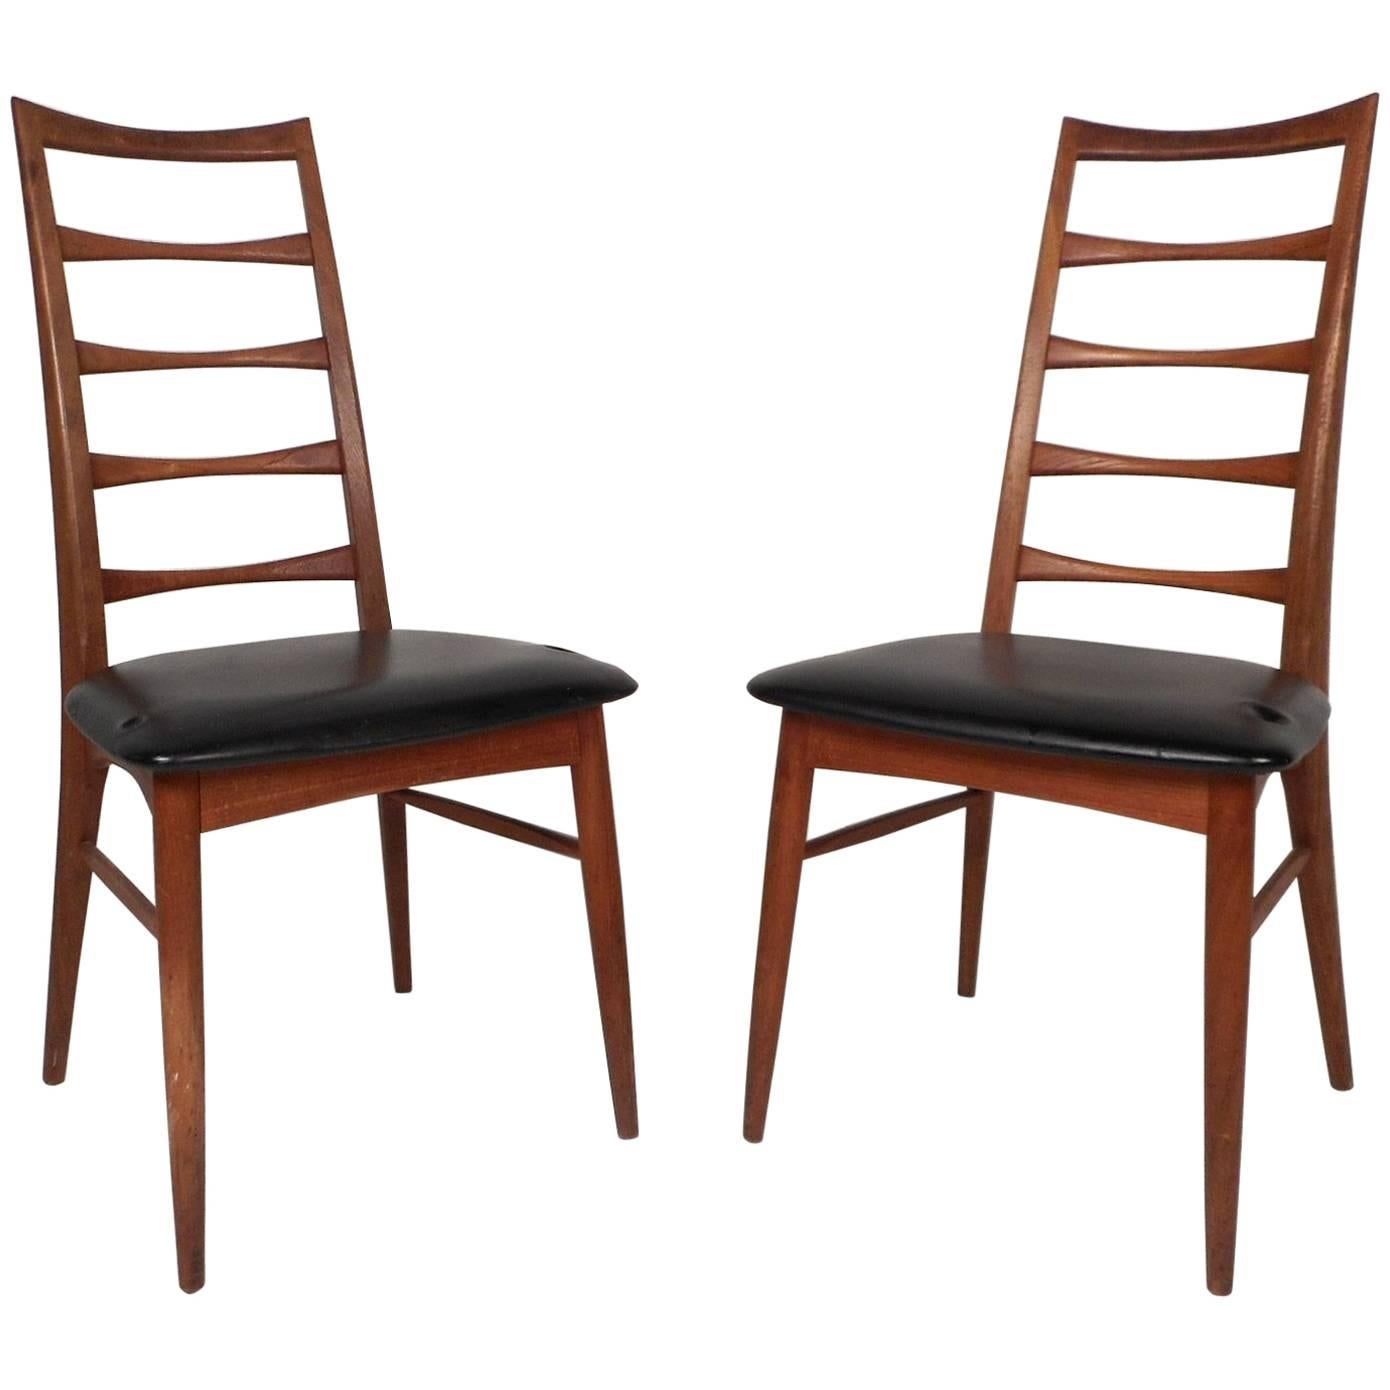 Pair of Danish Mid-Century Modern Dining Chairs by Koefoeds Hornslet